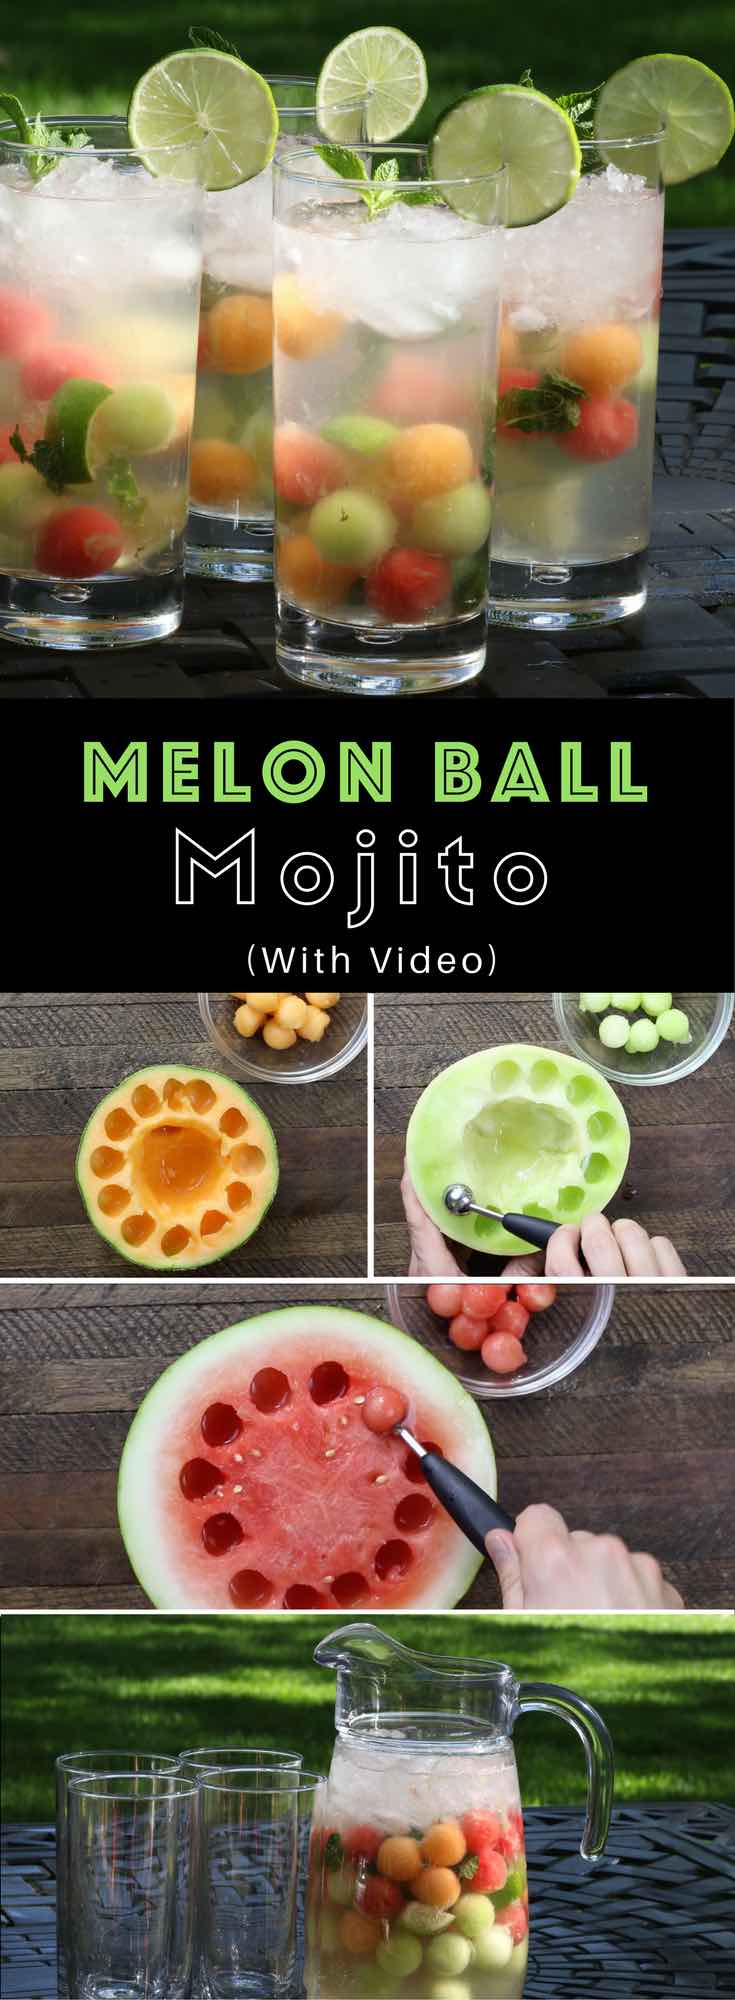 Easy Melon Ball Mojitos – the classic mojito cocktail fused with the sweetness and freshness of melon balls, delivering this refreshing and beautiful drink. All you need is only a few ingredients: mint, watermelon, cantaloupe and honeydew melons, white rum, sugar, lime, ice and sparkling water. Easy drinks recipe. Video recipe. | Tipbuzz.com